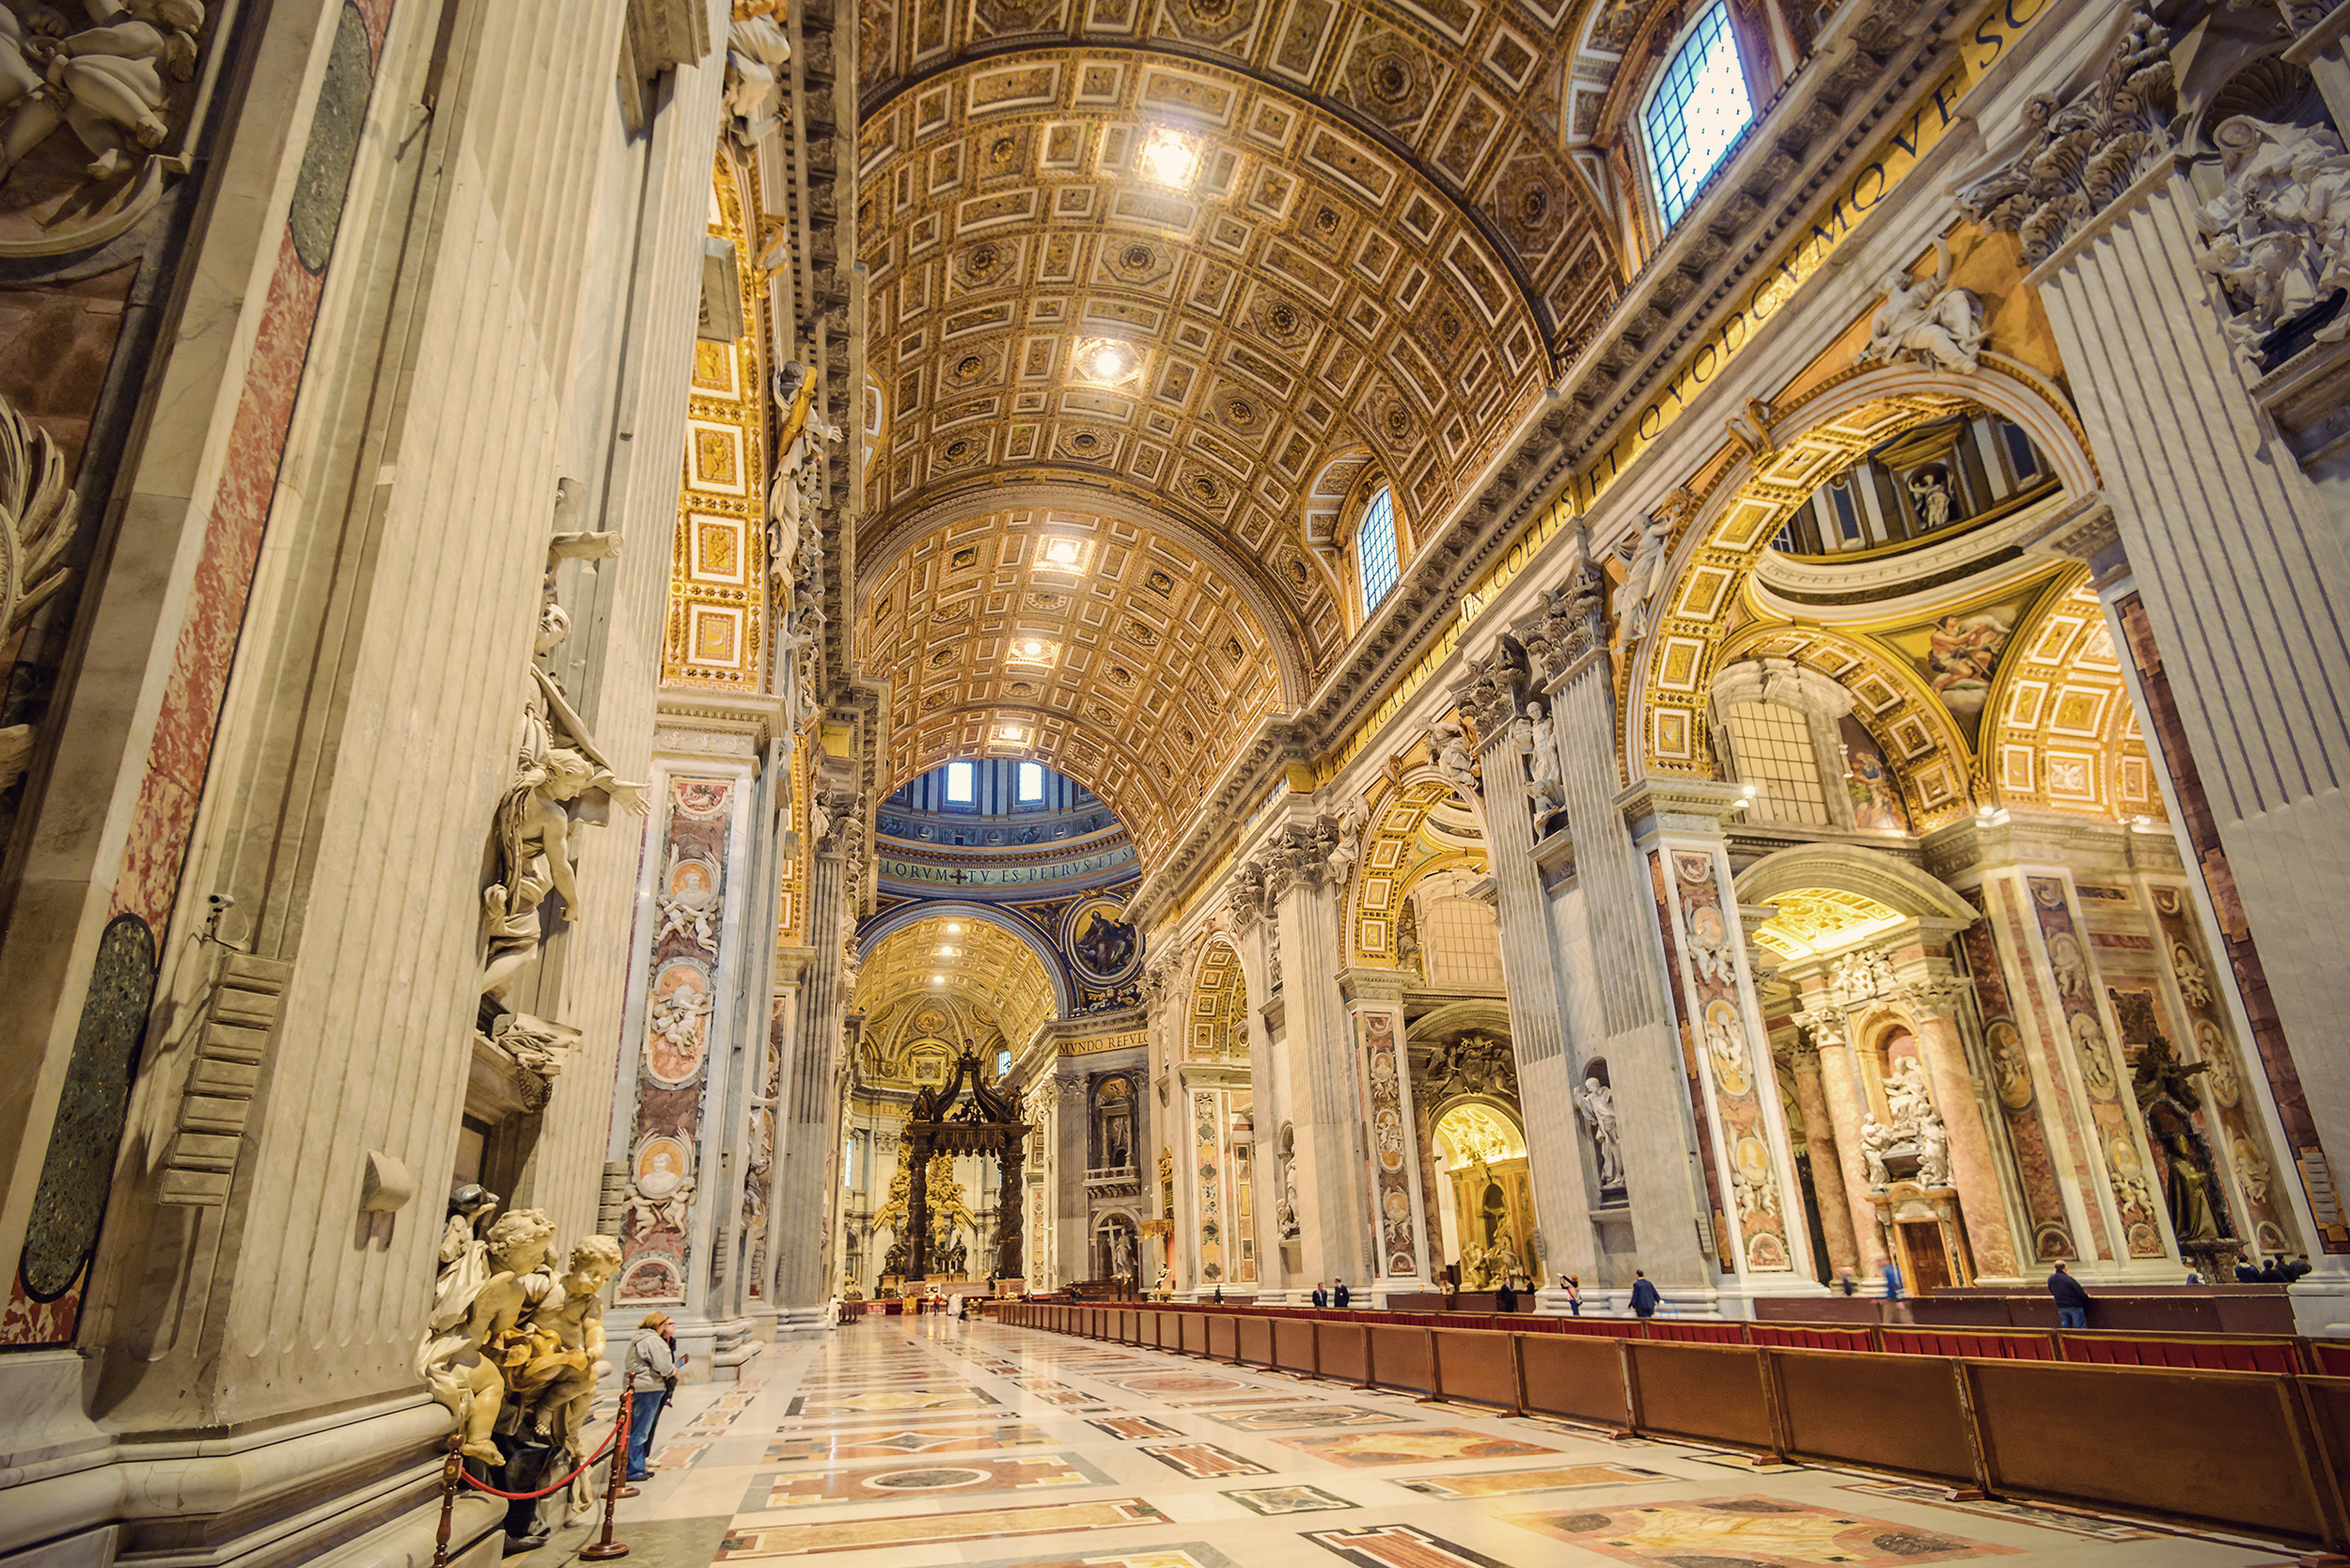 St. Peter's Basilica Guided Tour and Dome Entry Ticket